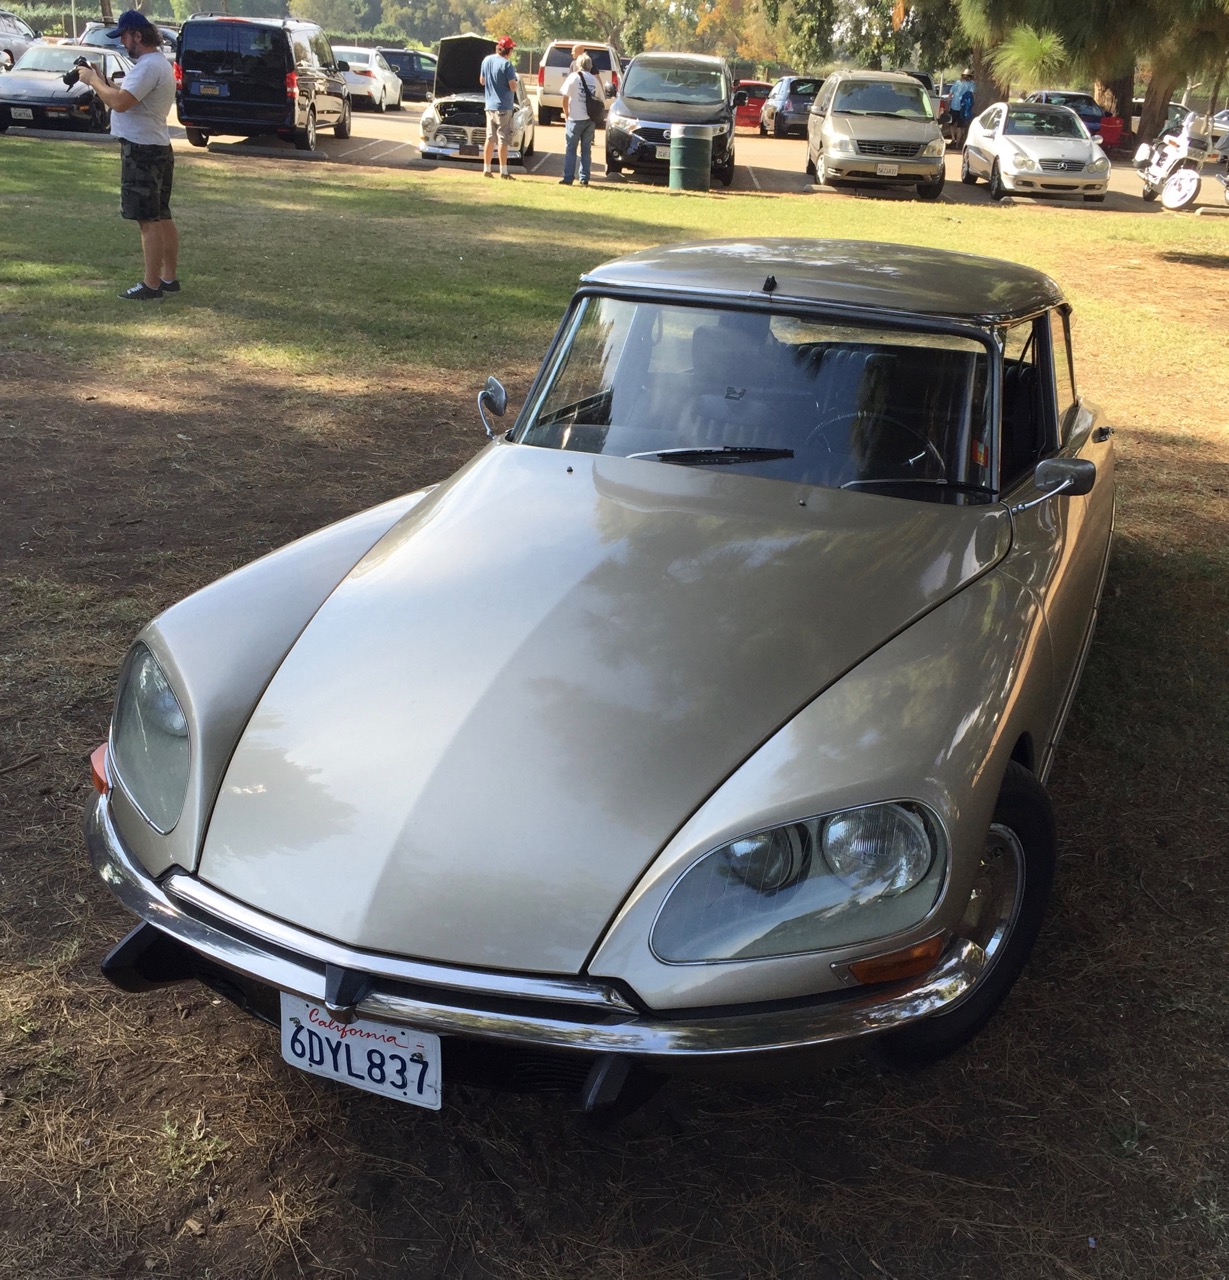 Citroen DS23 Pallas among the French cars on the field